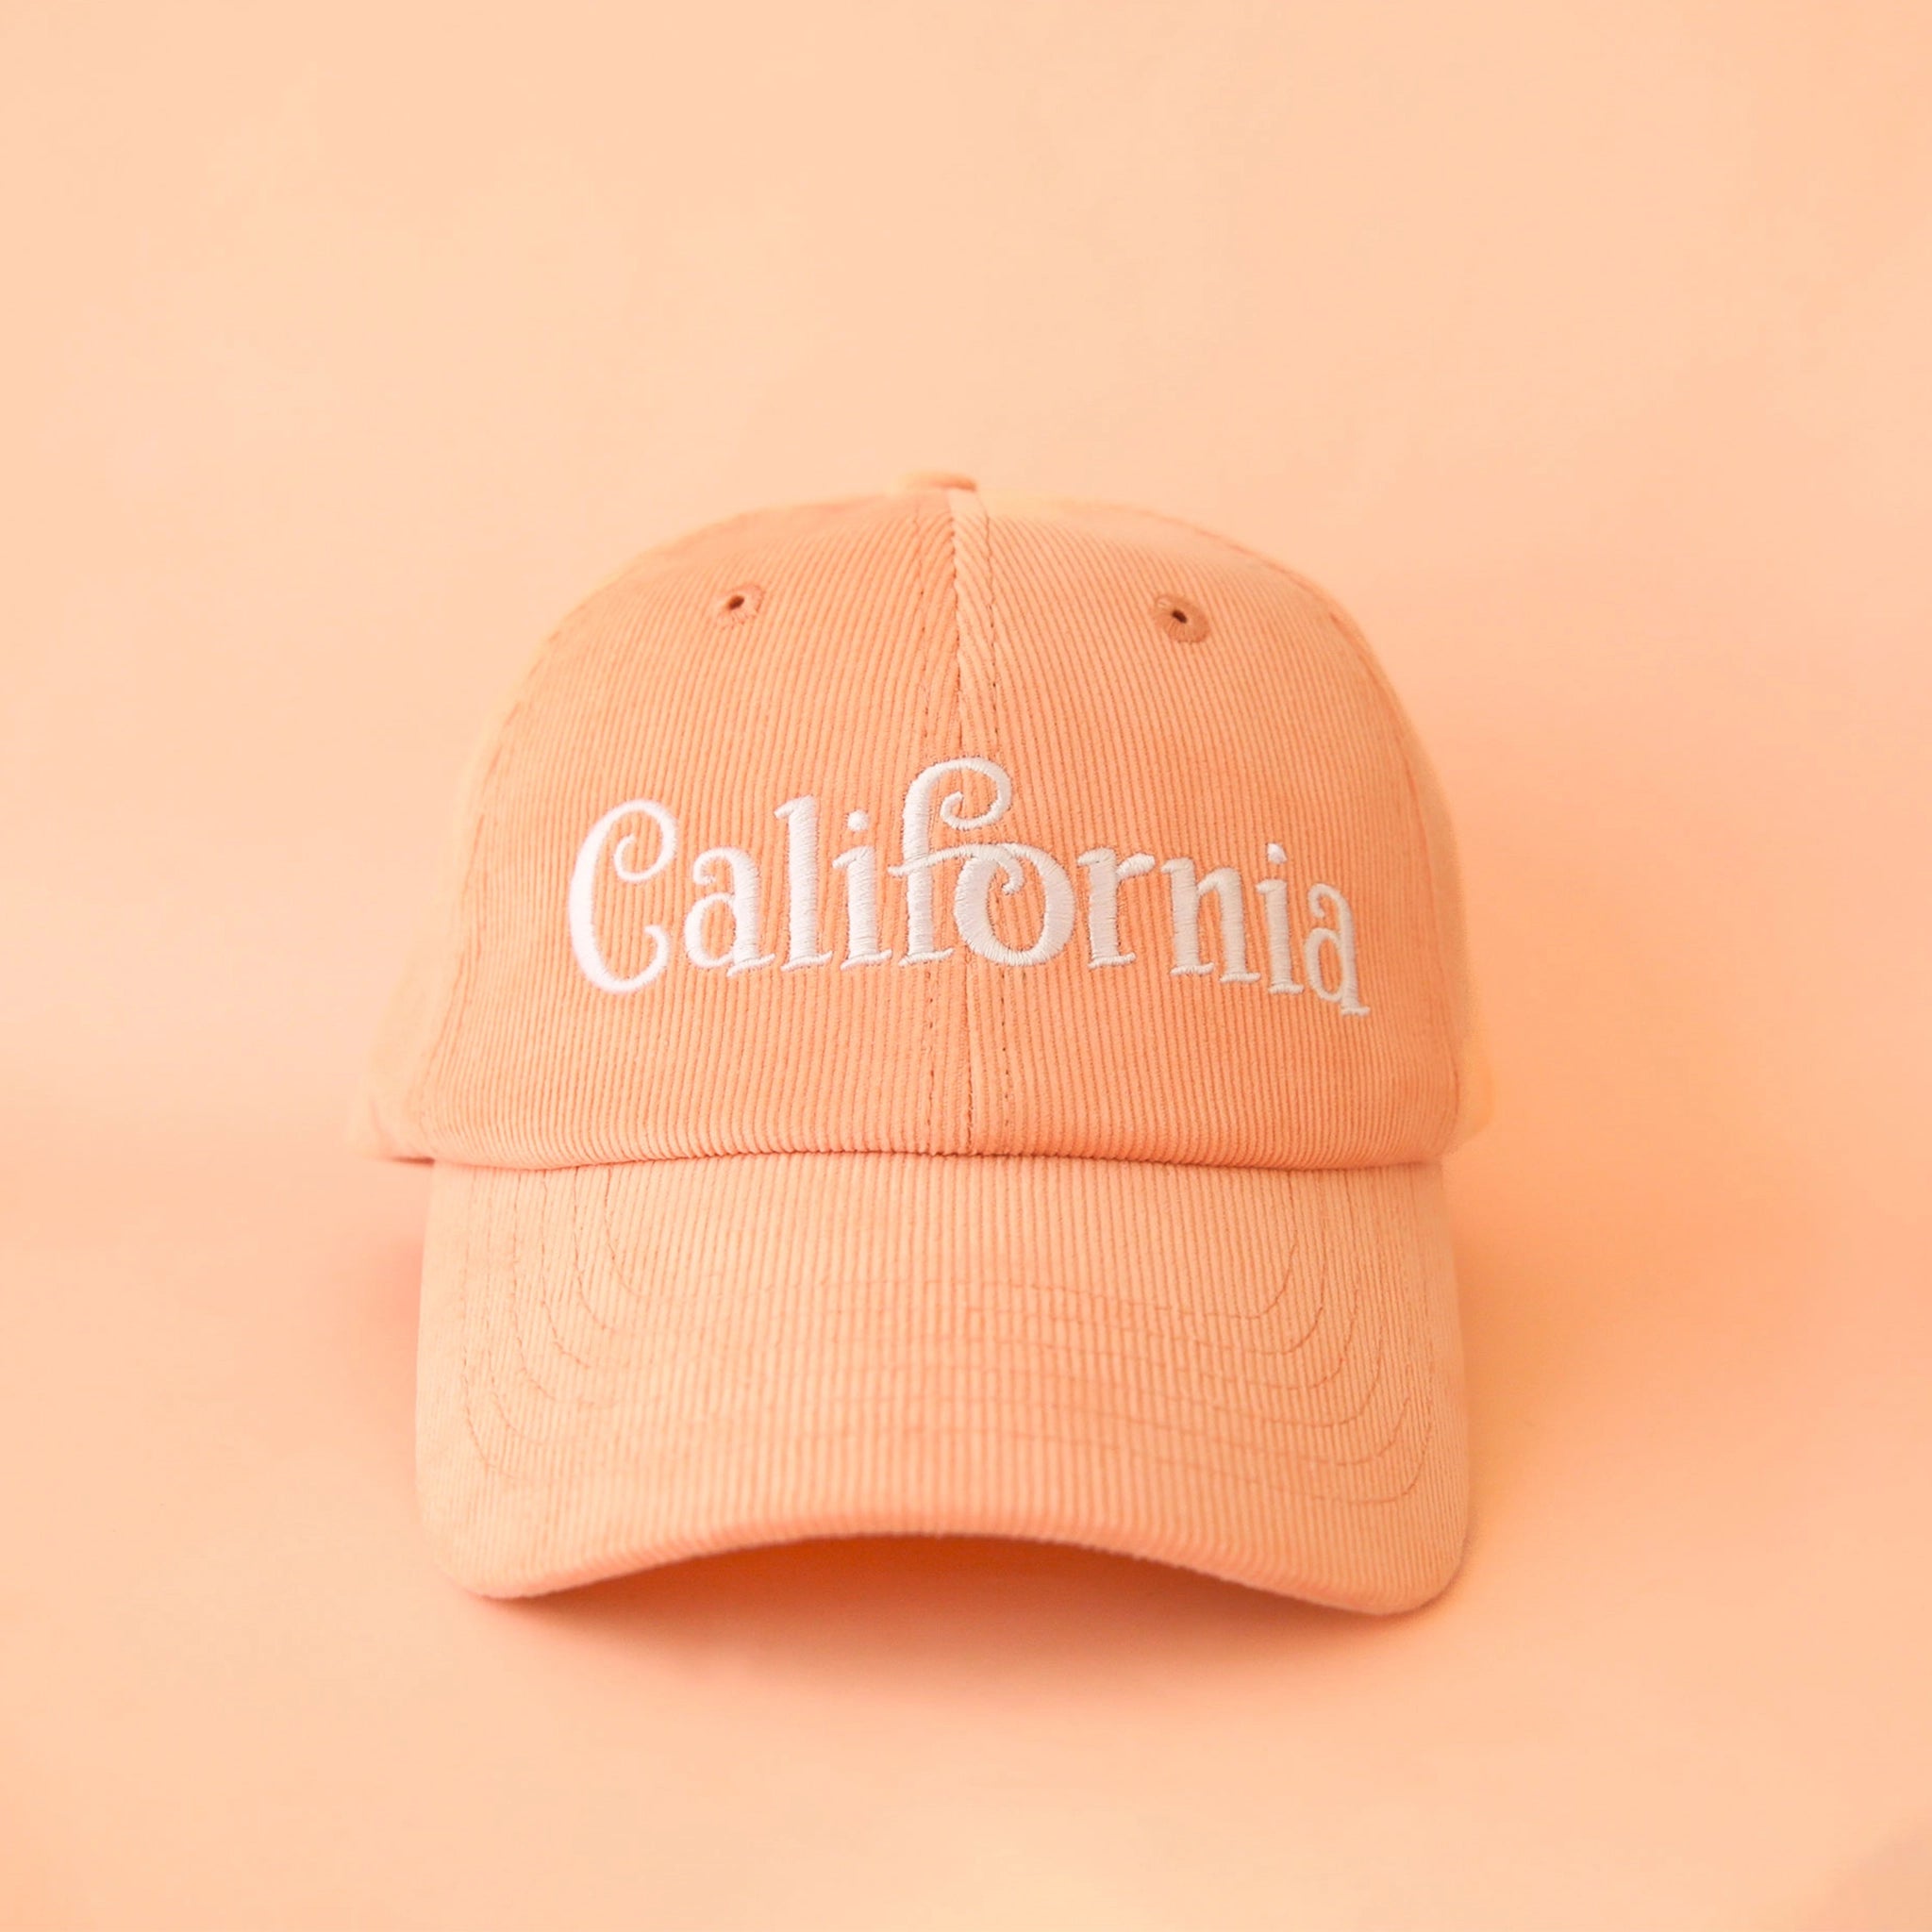 On a peach background is a peach corduroy baseball hat with white embroidery that reads, "California".